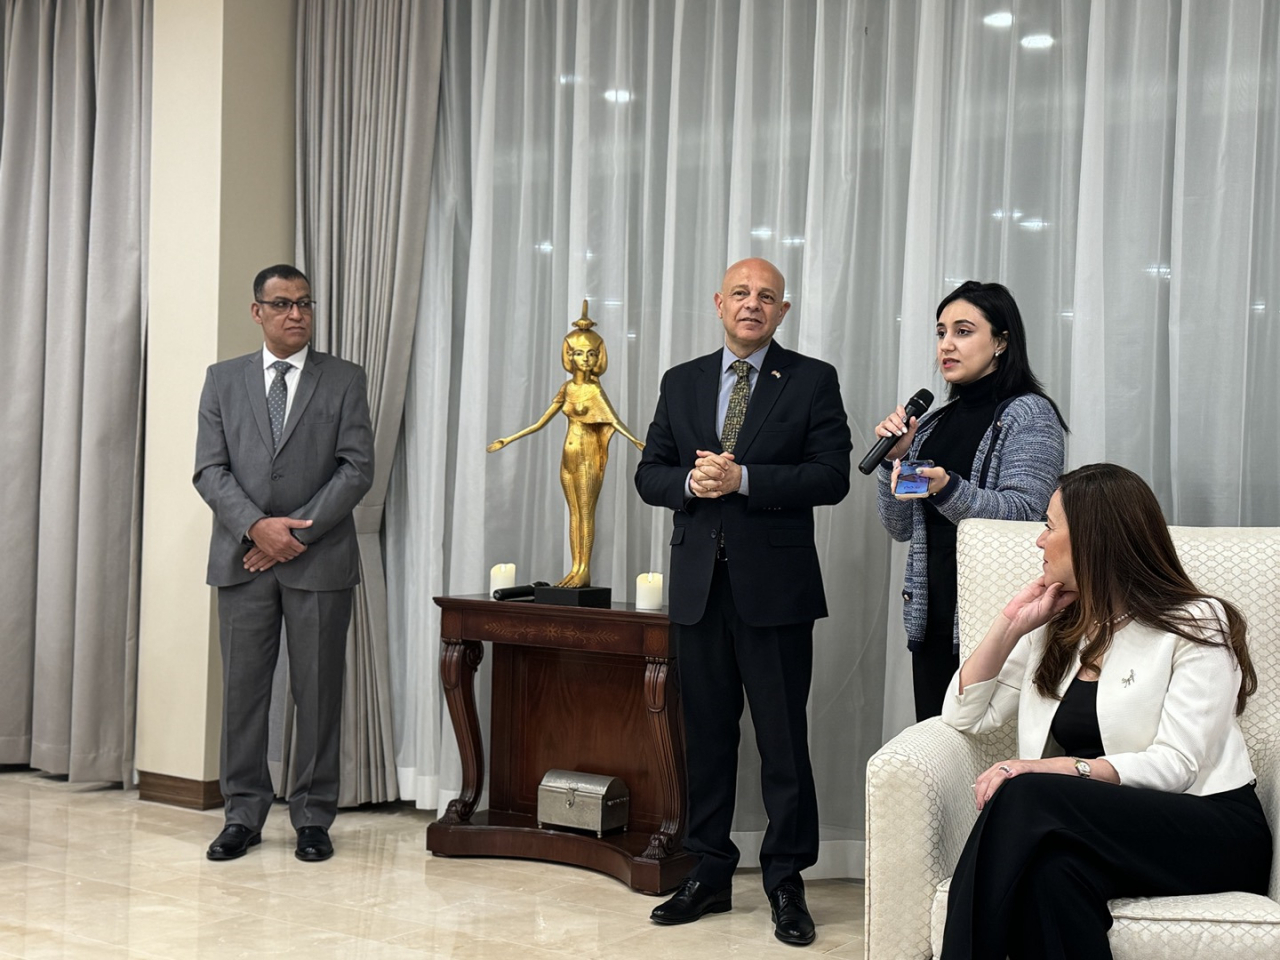 Mohamed Younes, Director at the Egyptian Tourism Authority, speaks at an event to promote Egyptian tourism at the Egyptian Embassy in Yongsan-gu, Seoul on Thursday.(Sanjay Kumar/The Korea Herald)